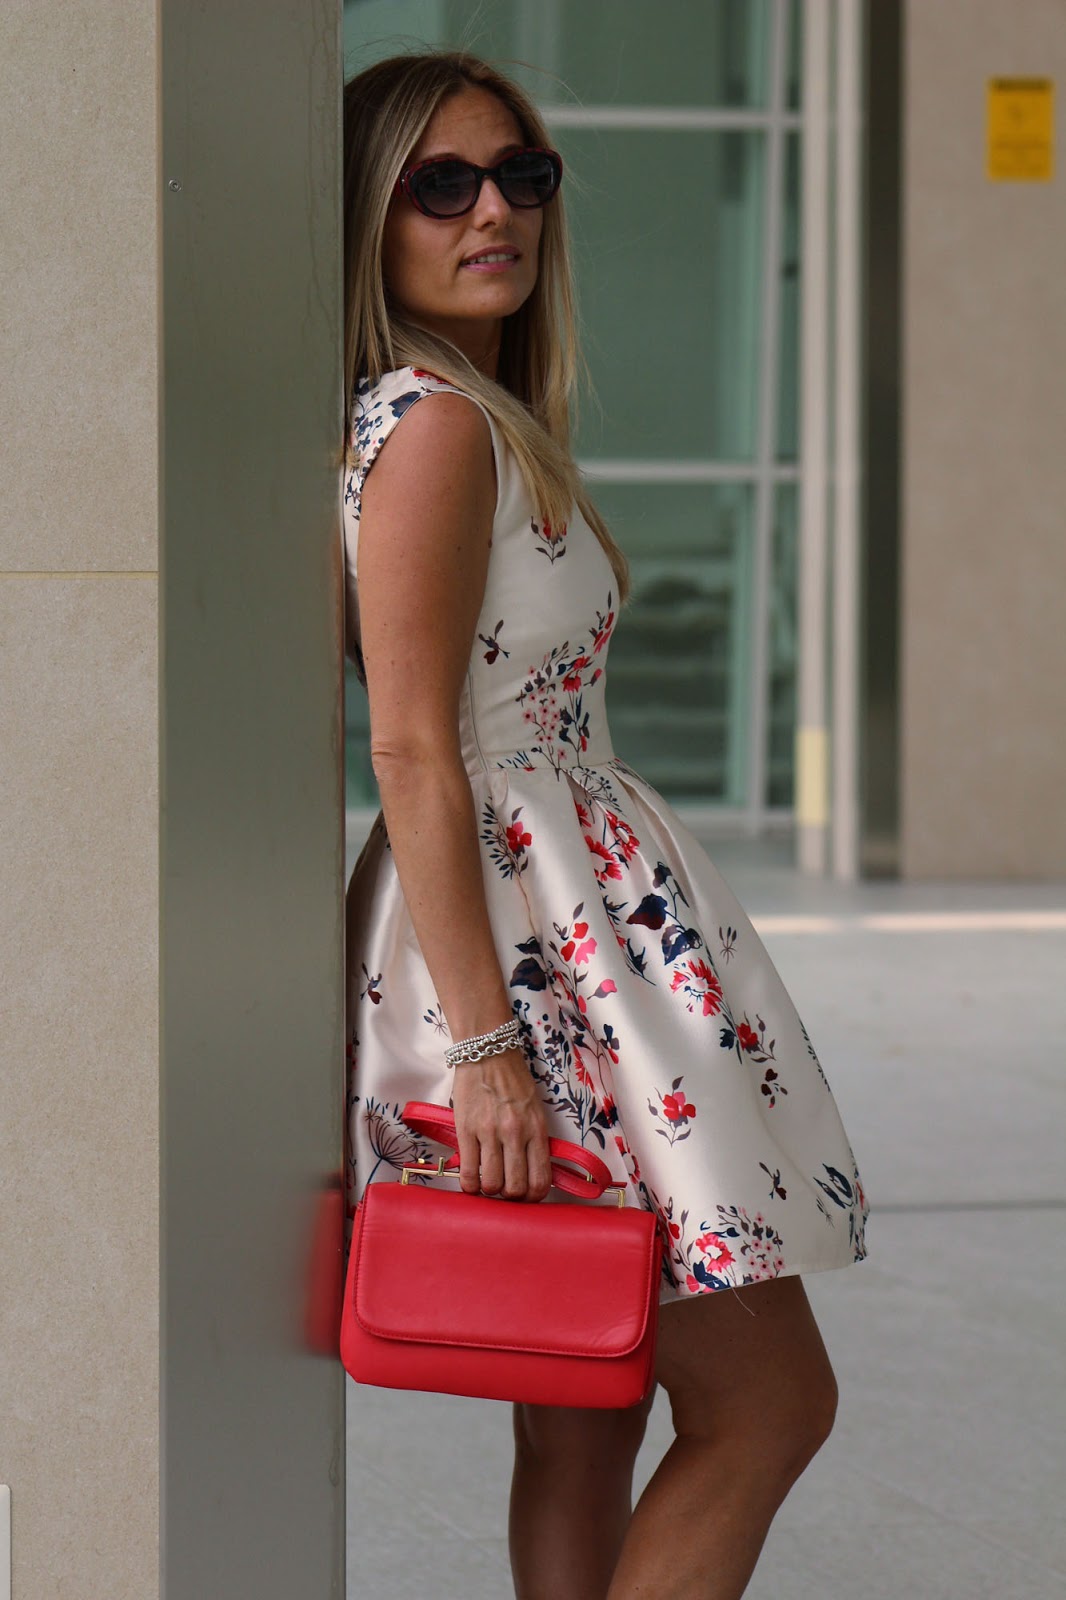 Eniwhere Fashion - Sammydress floral dress outfit